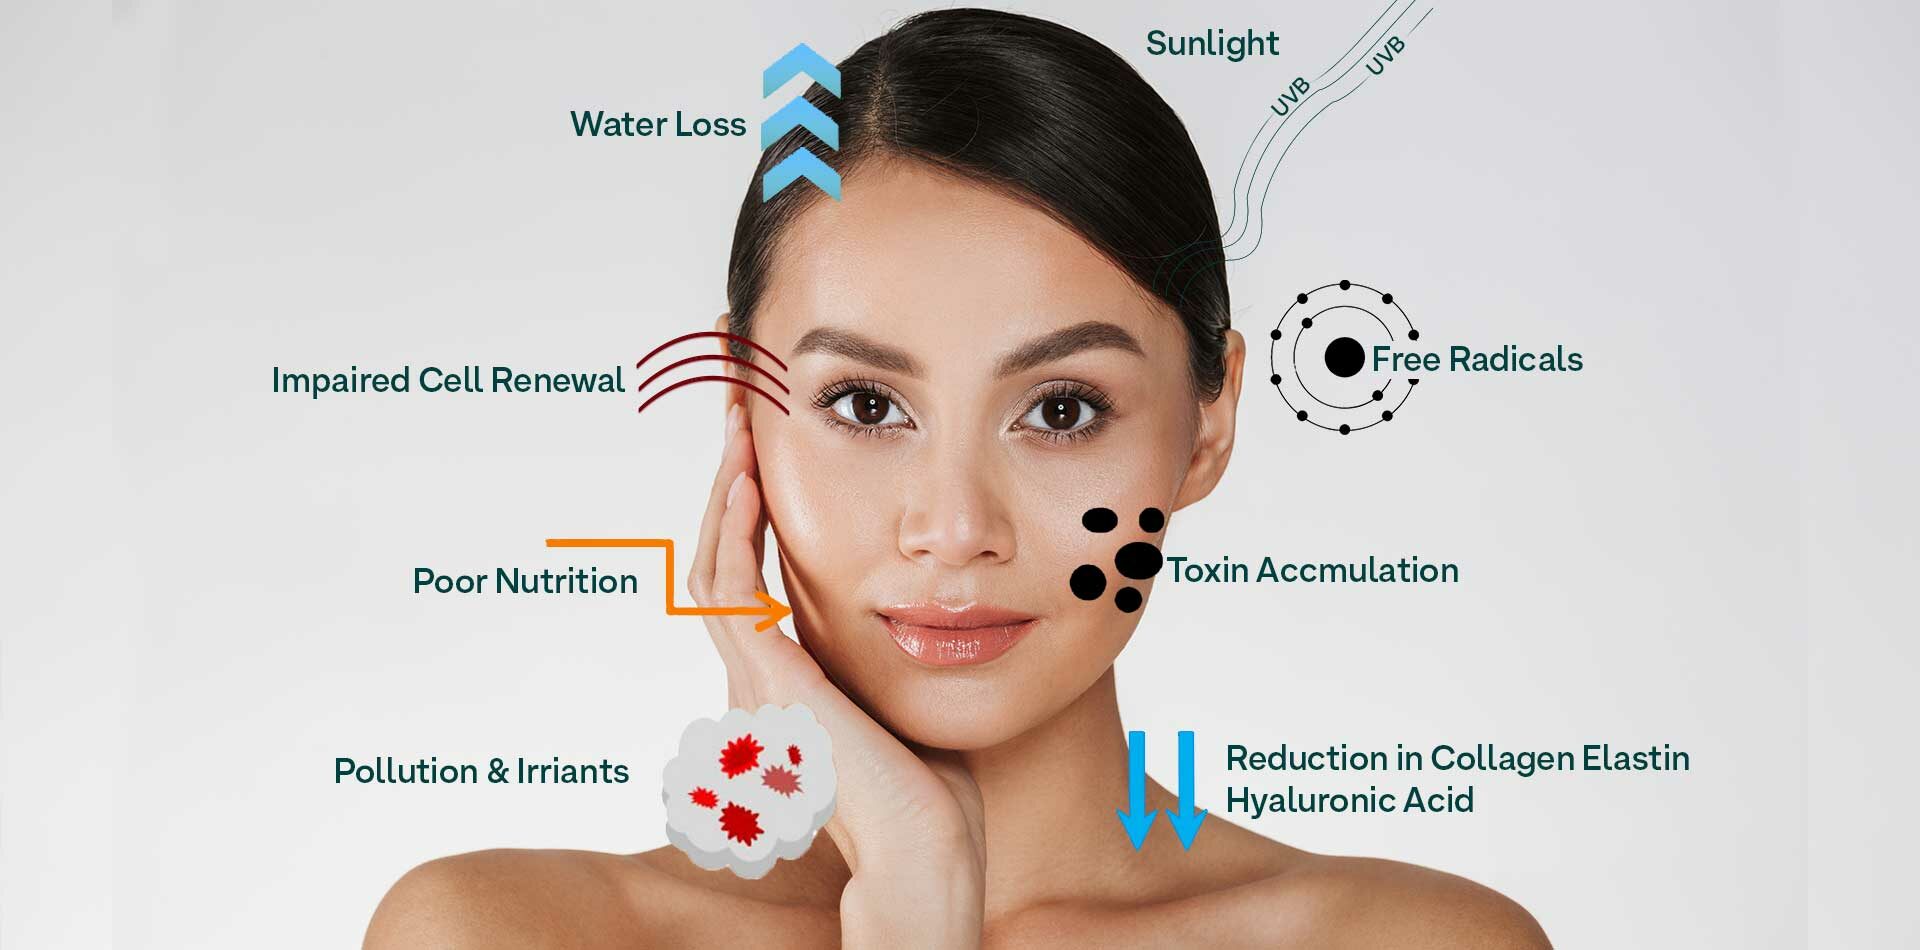 Signs of Ageing & the Process of Anti-Ageing